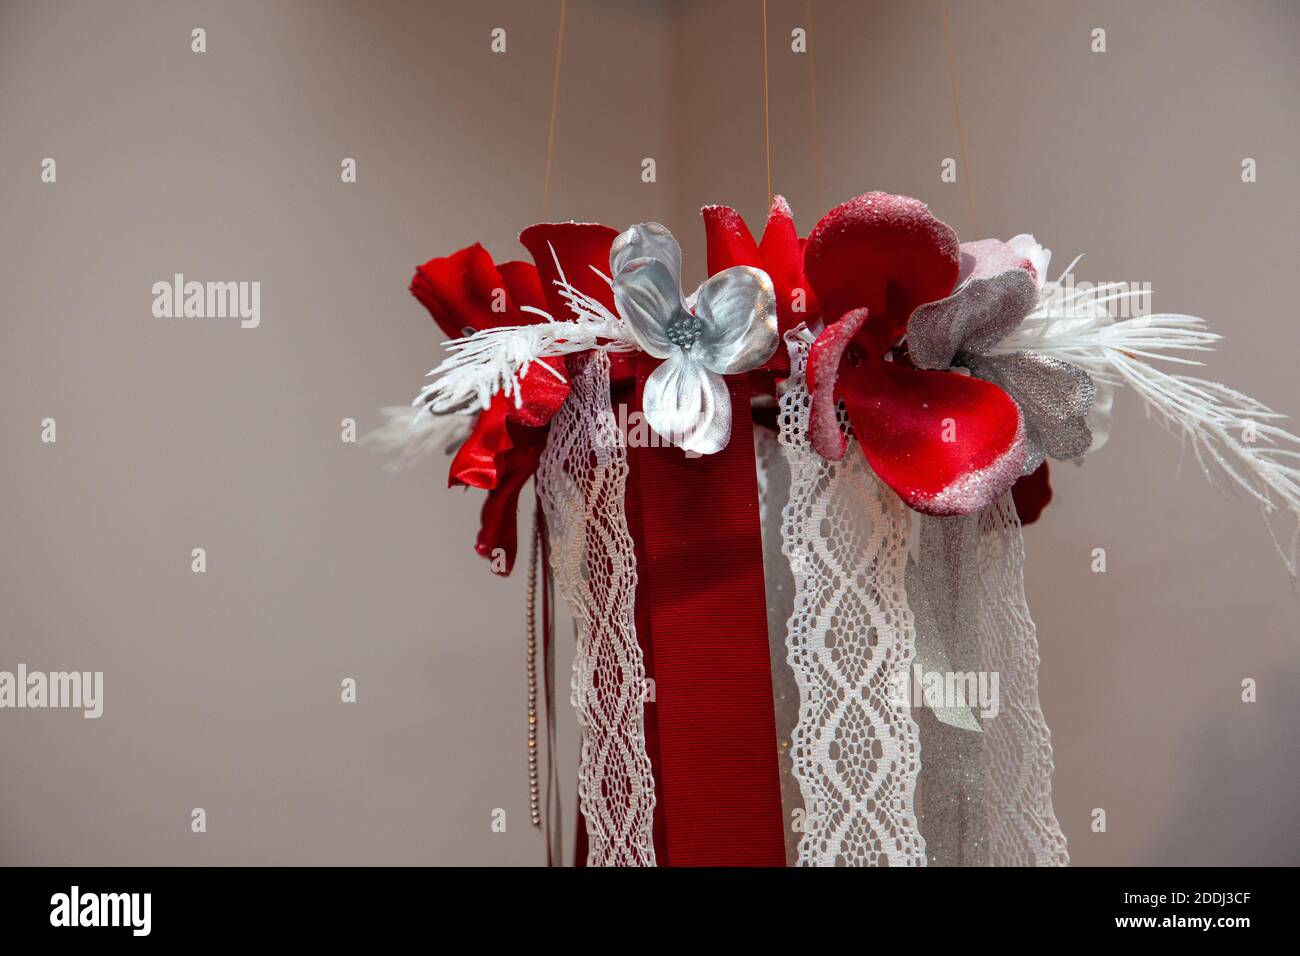 a decorative holiday christmas chandelier made of fabric and flowers Stock Photo